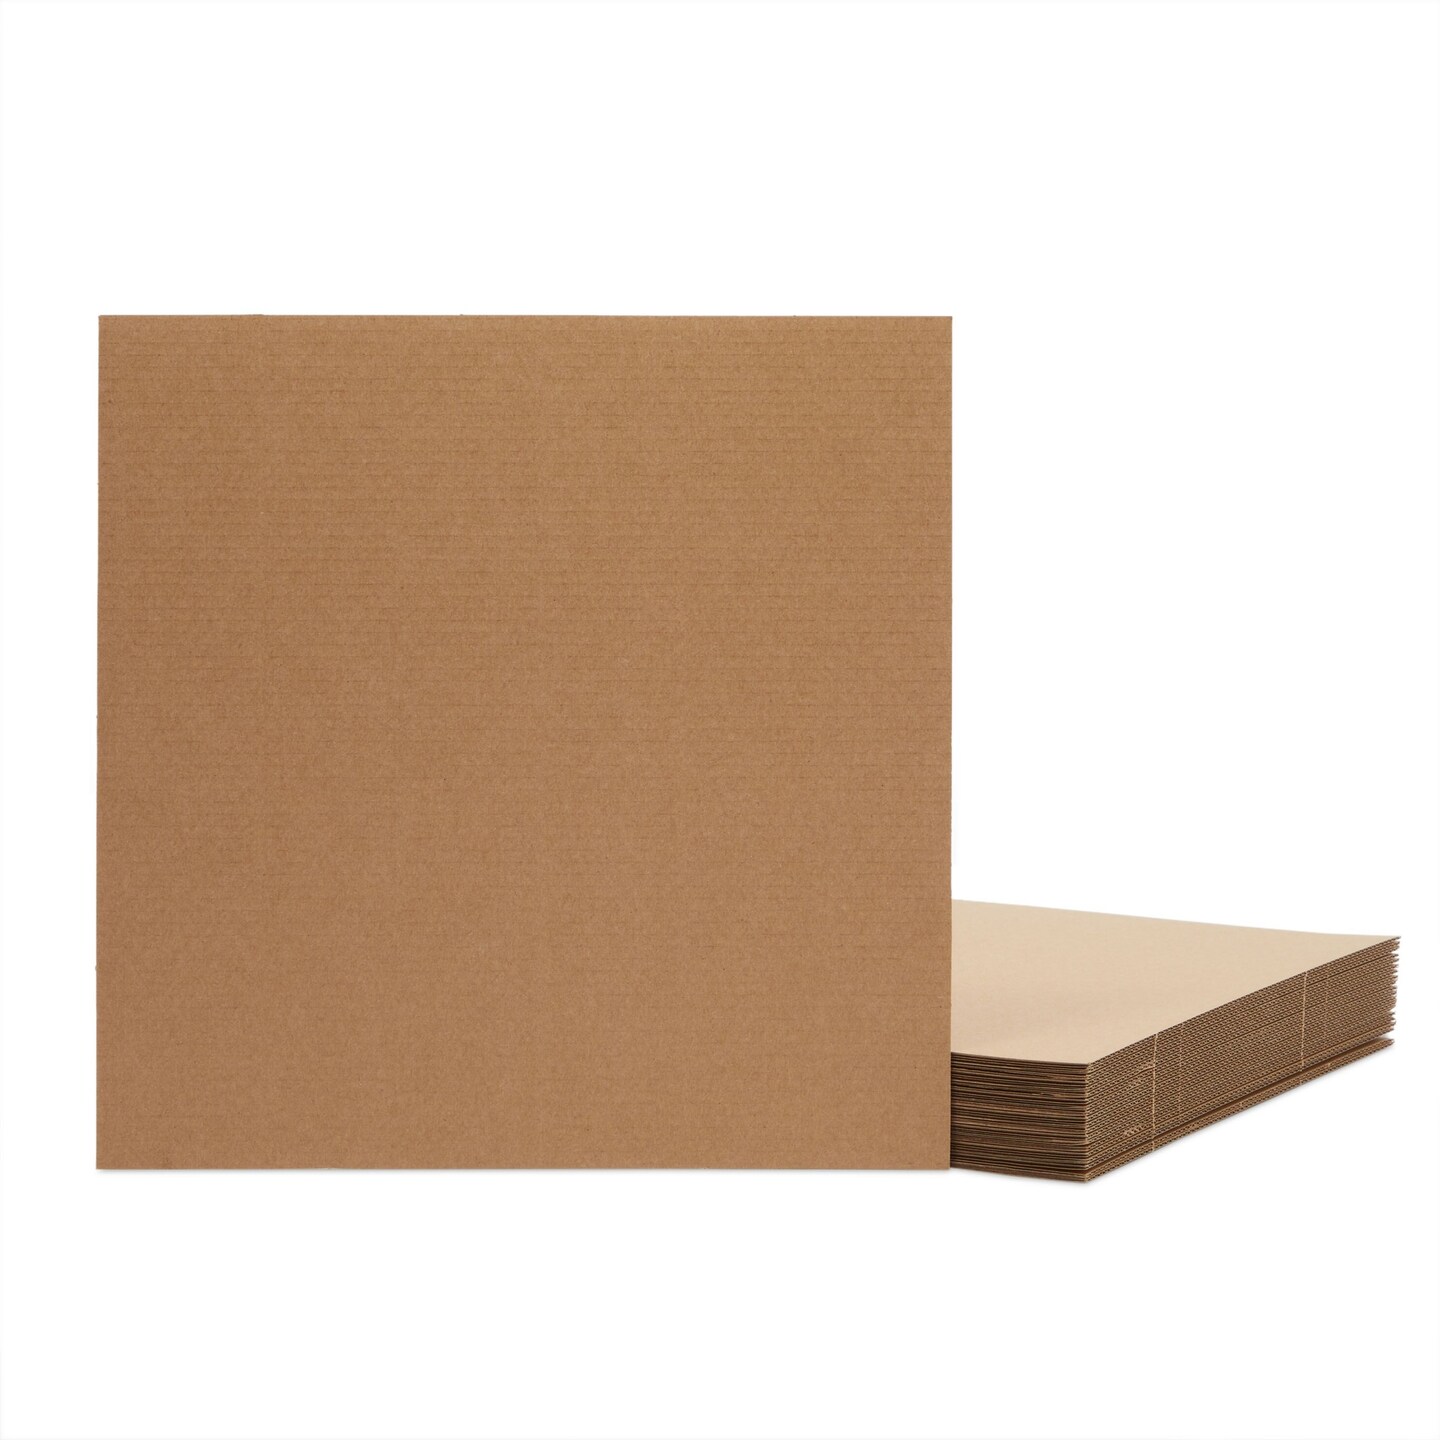 24 Pack Thick Corrugated Cardboard Sheets, Bulk Flat 12x12 Square Inserts  for Packing, Mailing, DIY Crafts